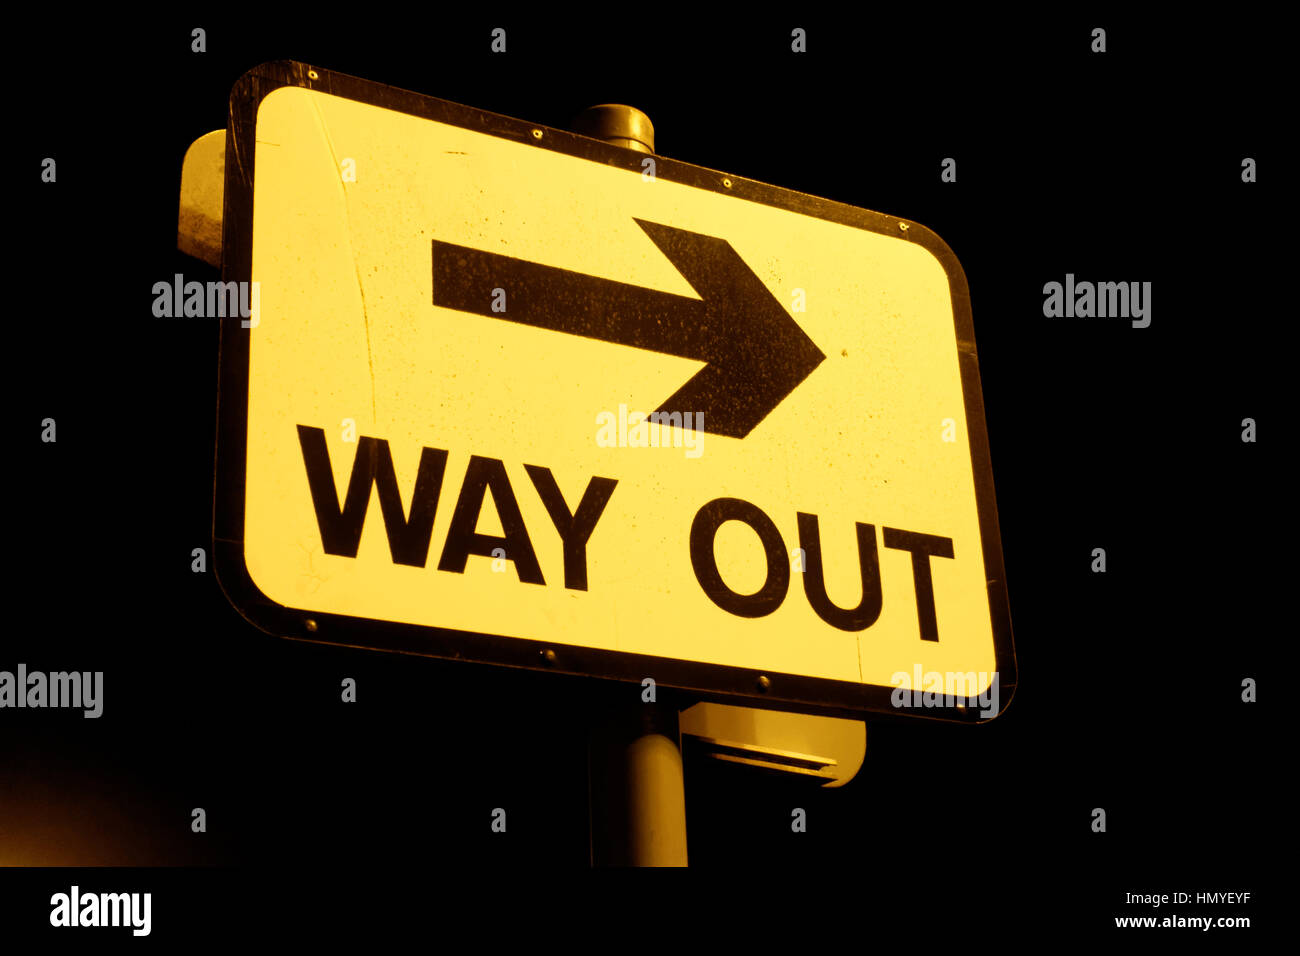 way out sign with arrow Stock Photo